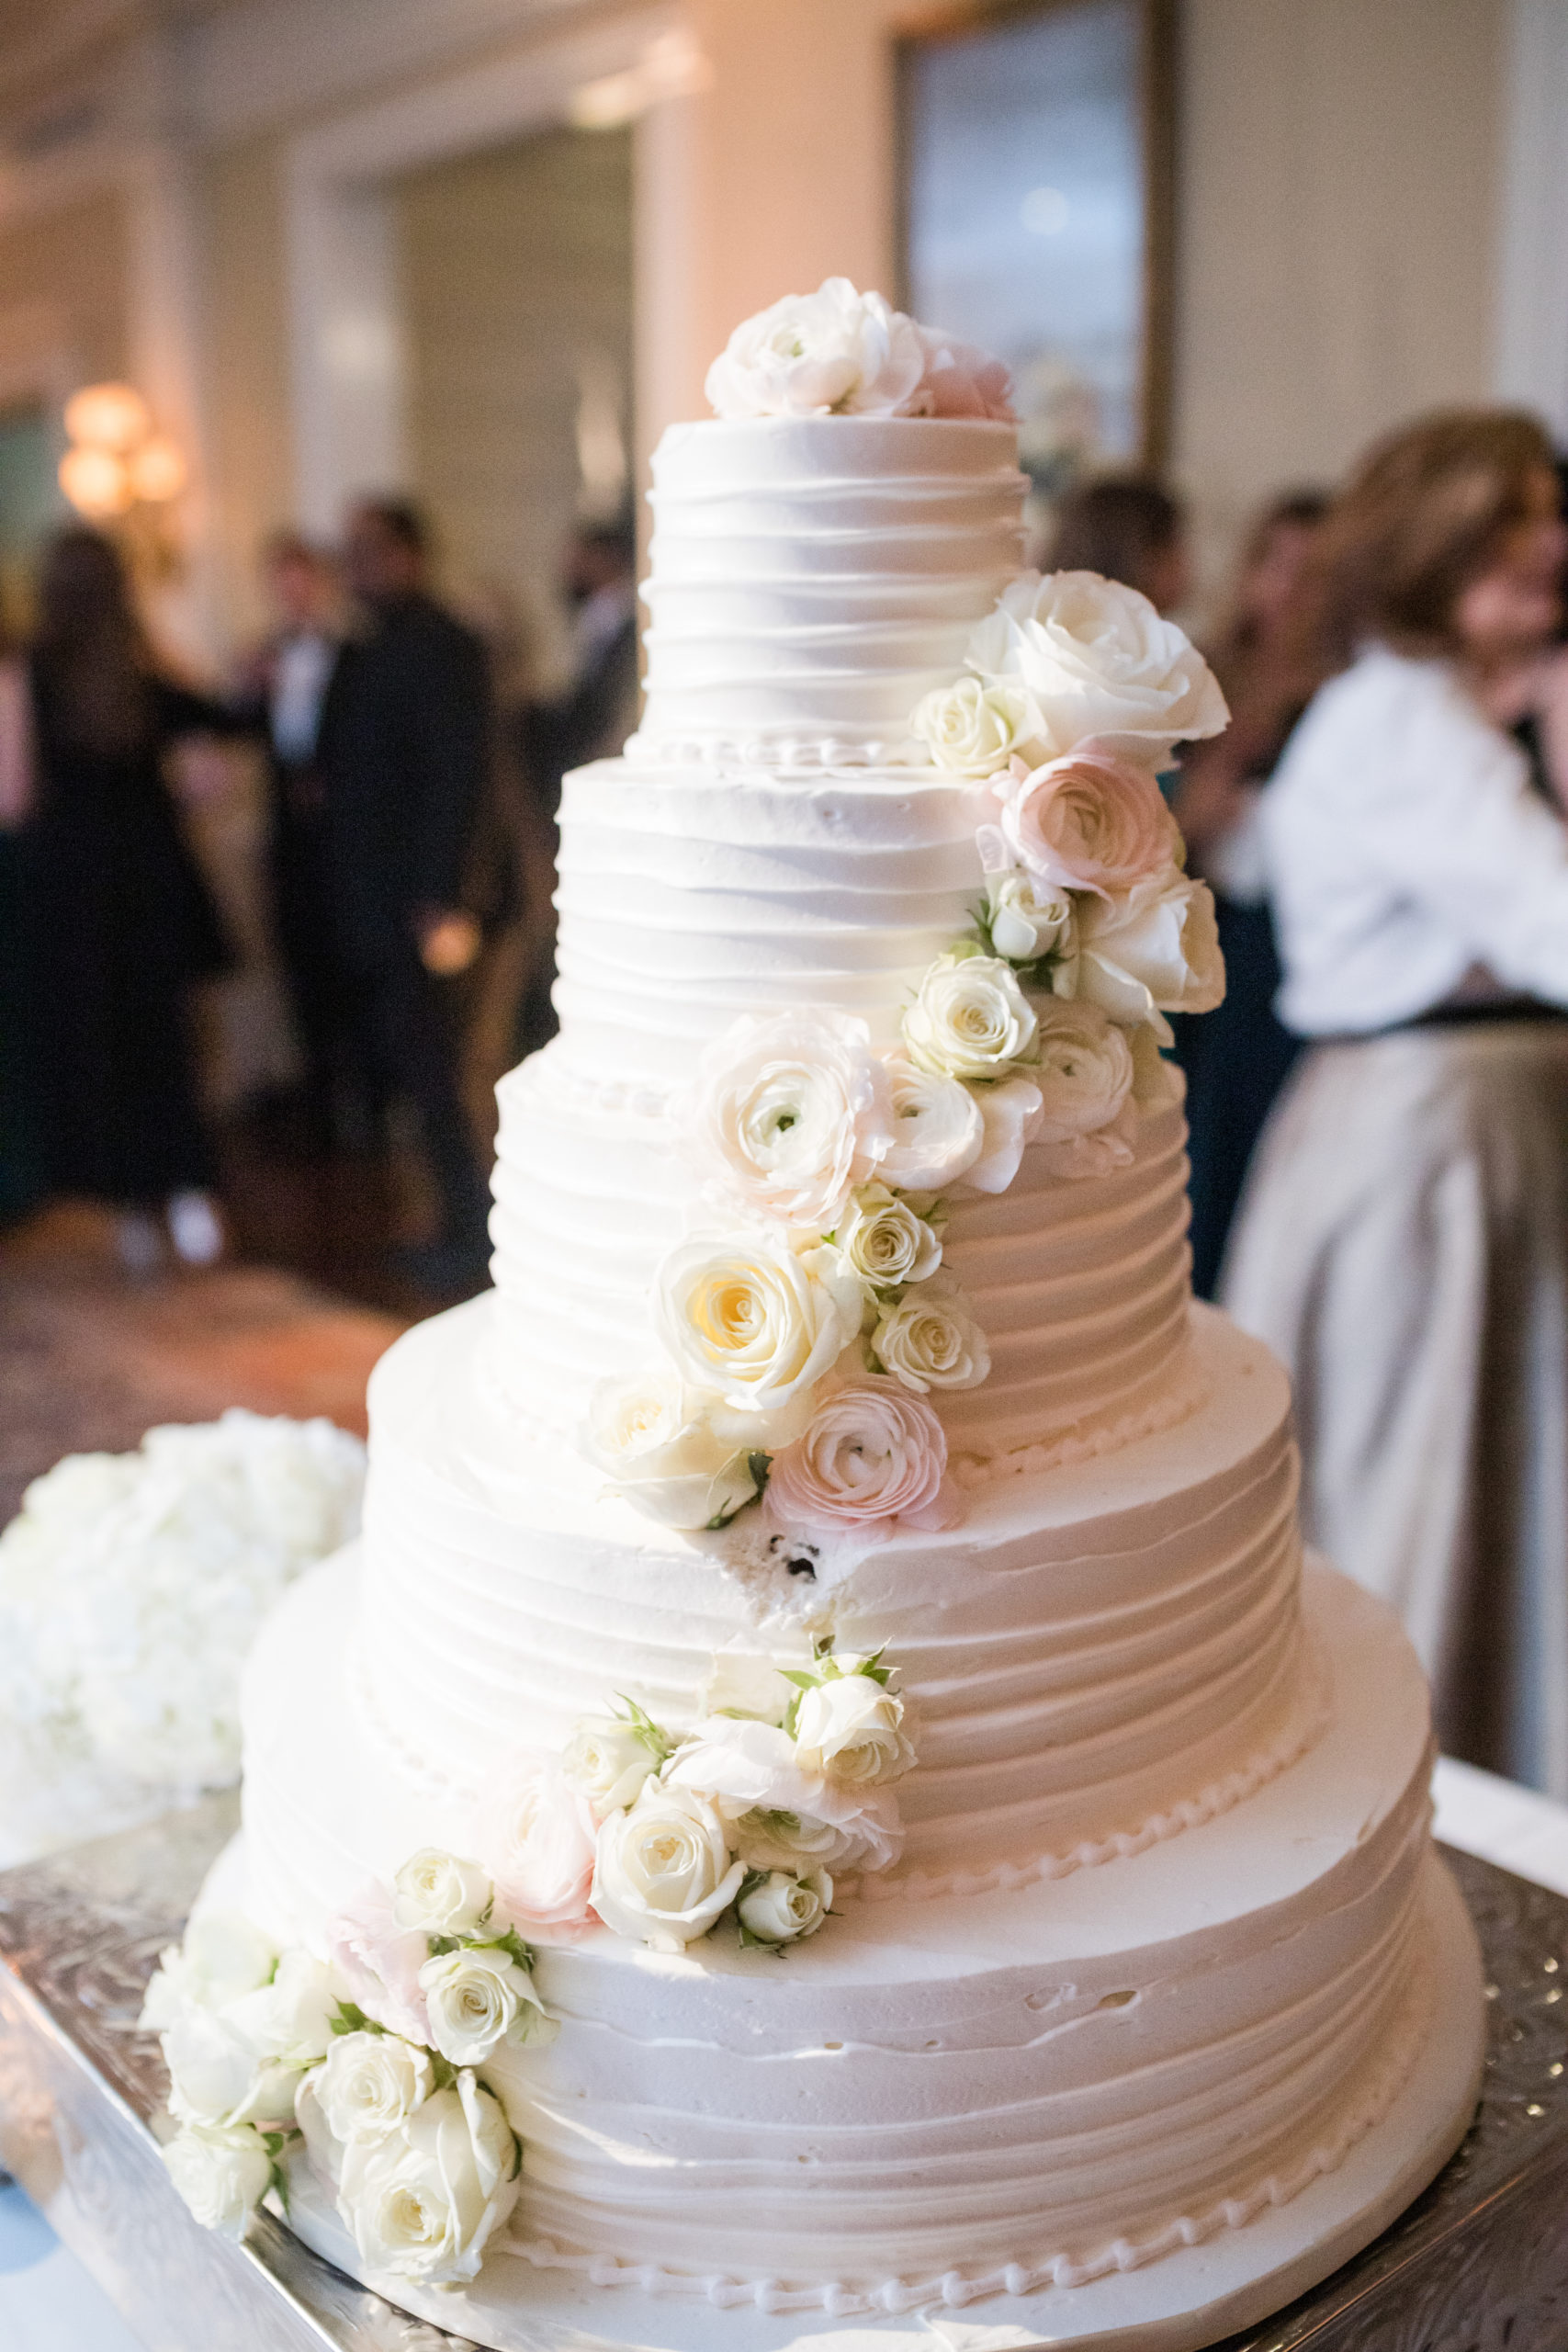 Spring Wedding at Belle Meade Country Club in Nashville, Tennessee by Sweet Williams Photography, a wedding and portrait photographer.